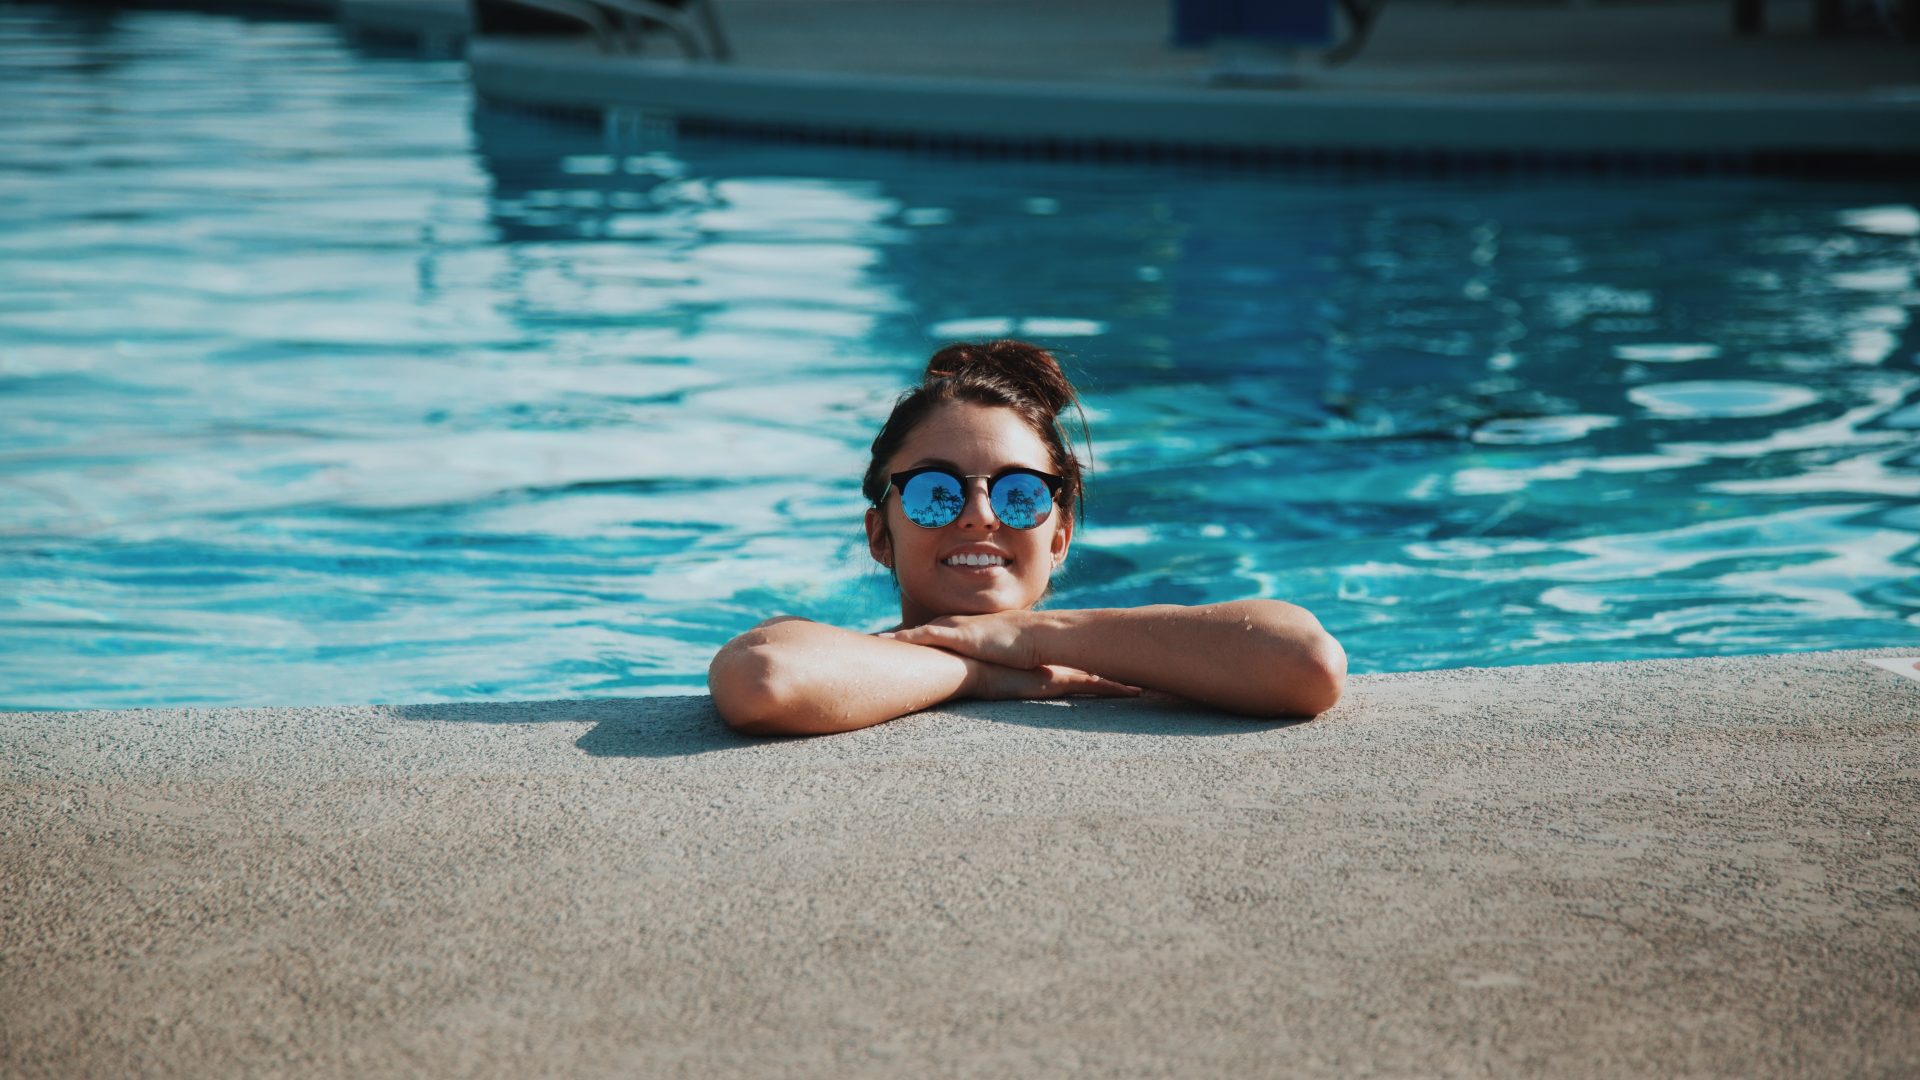 woman wearing sunglasses on swimming pool during daytime